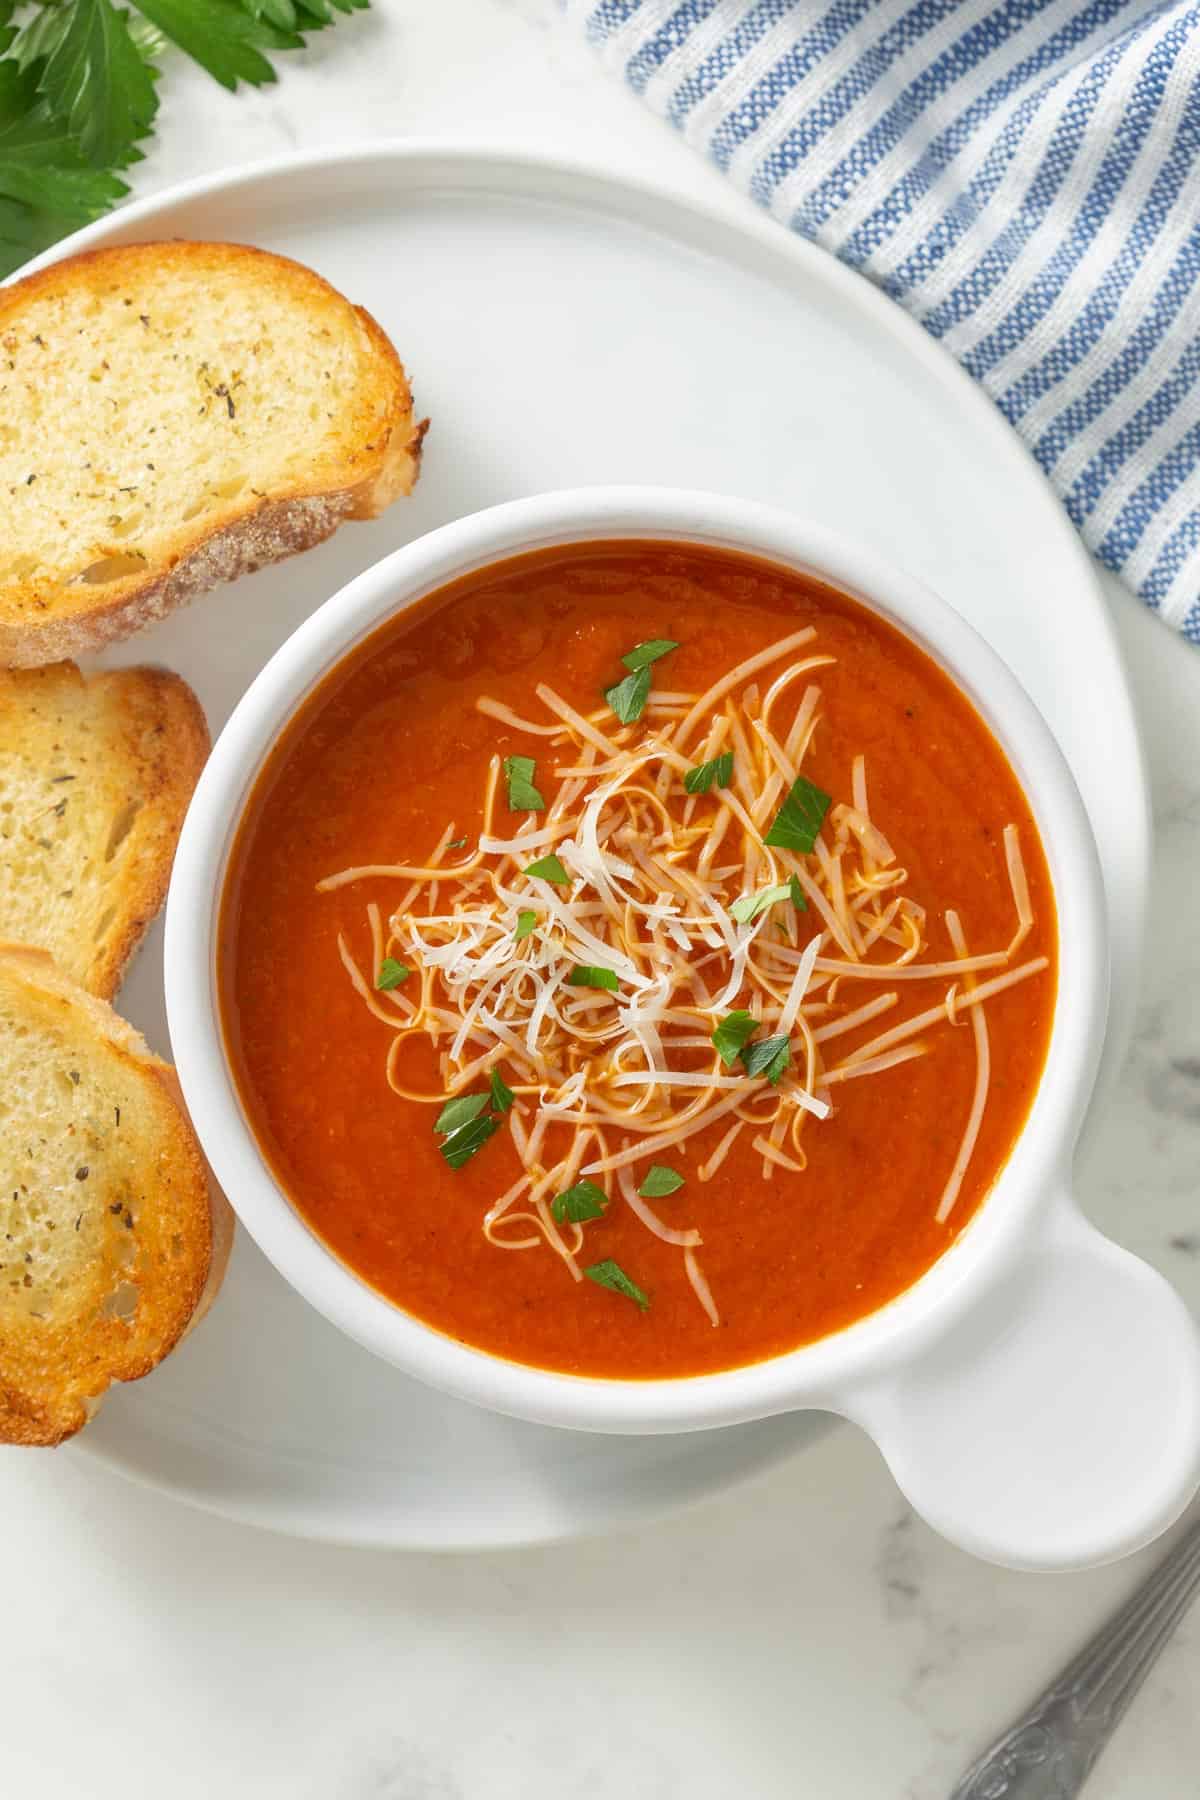 Overhead view of easy tomato soup in a white bowl beside three slices of French bread.  